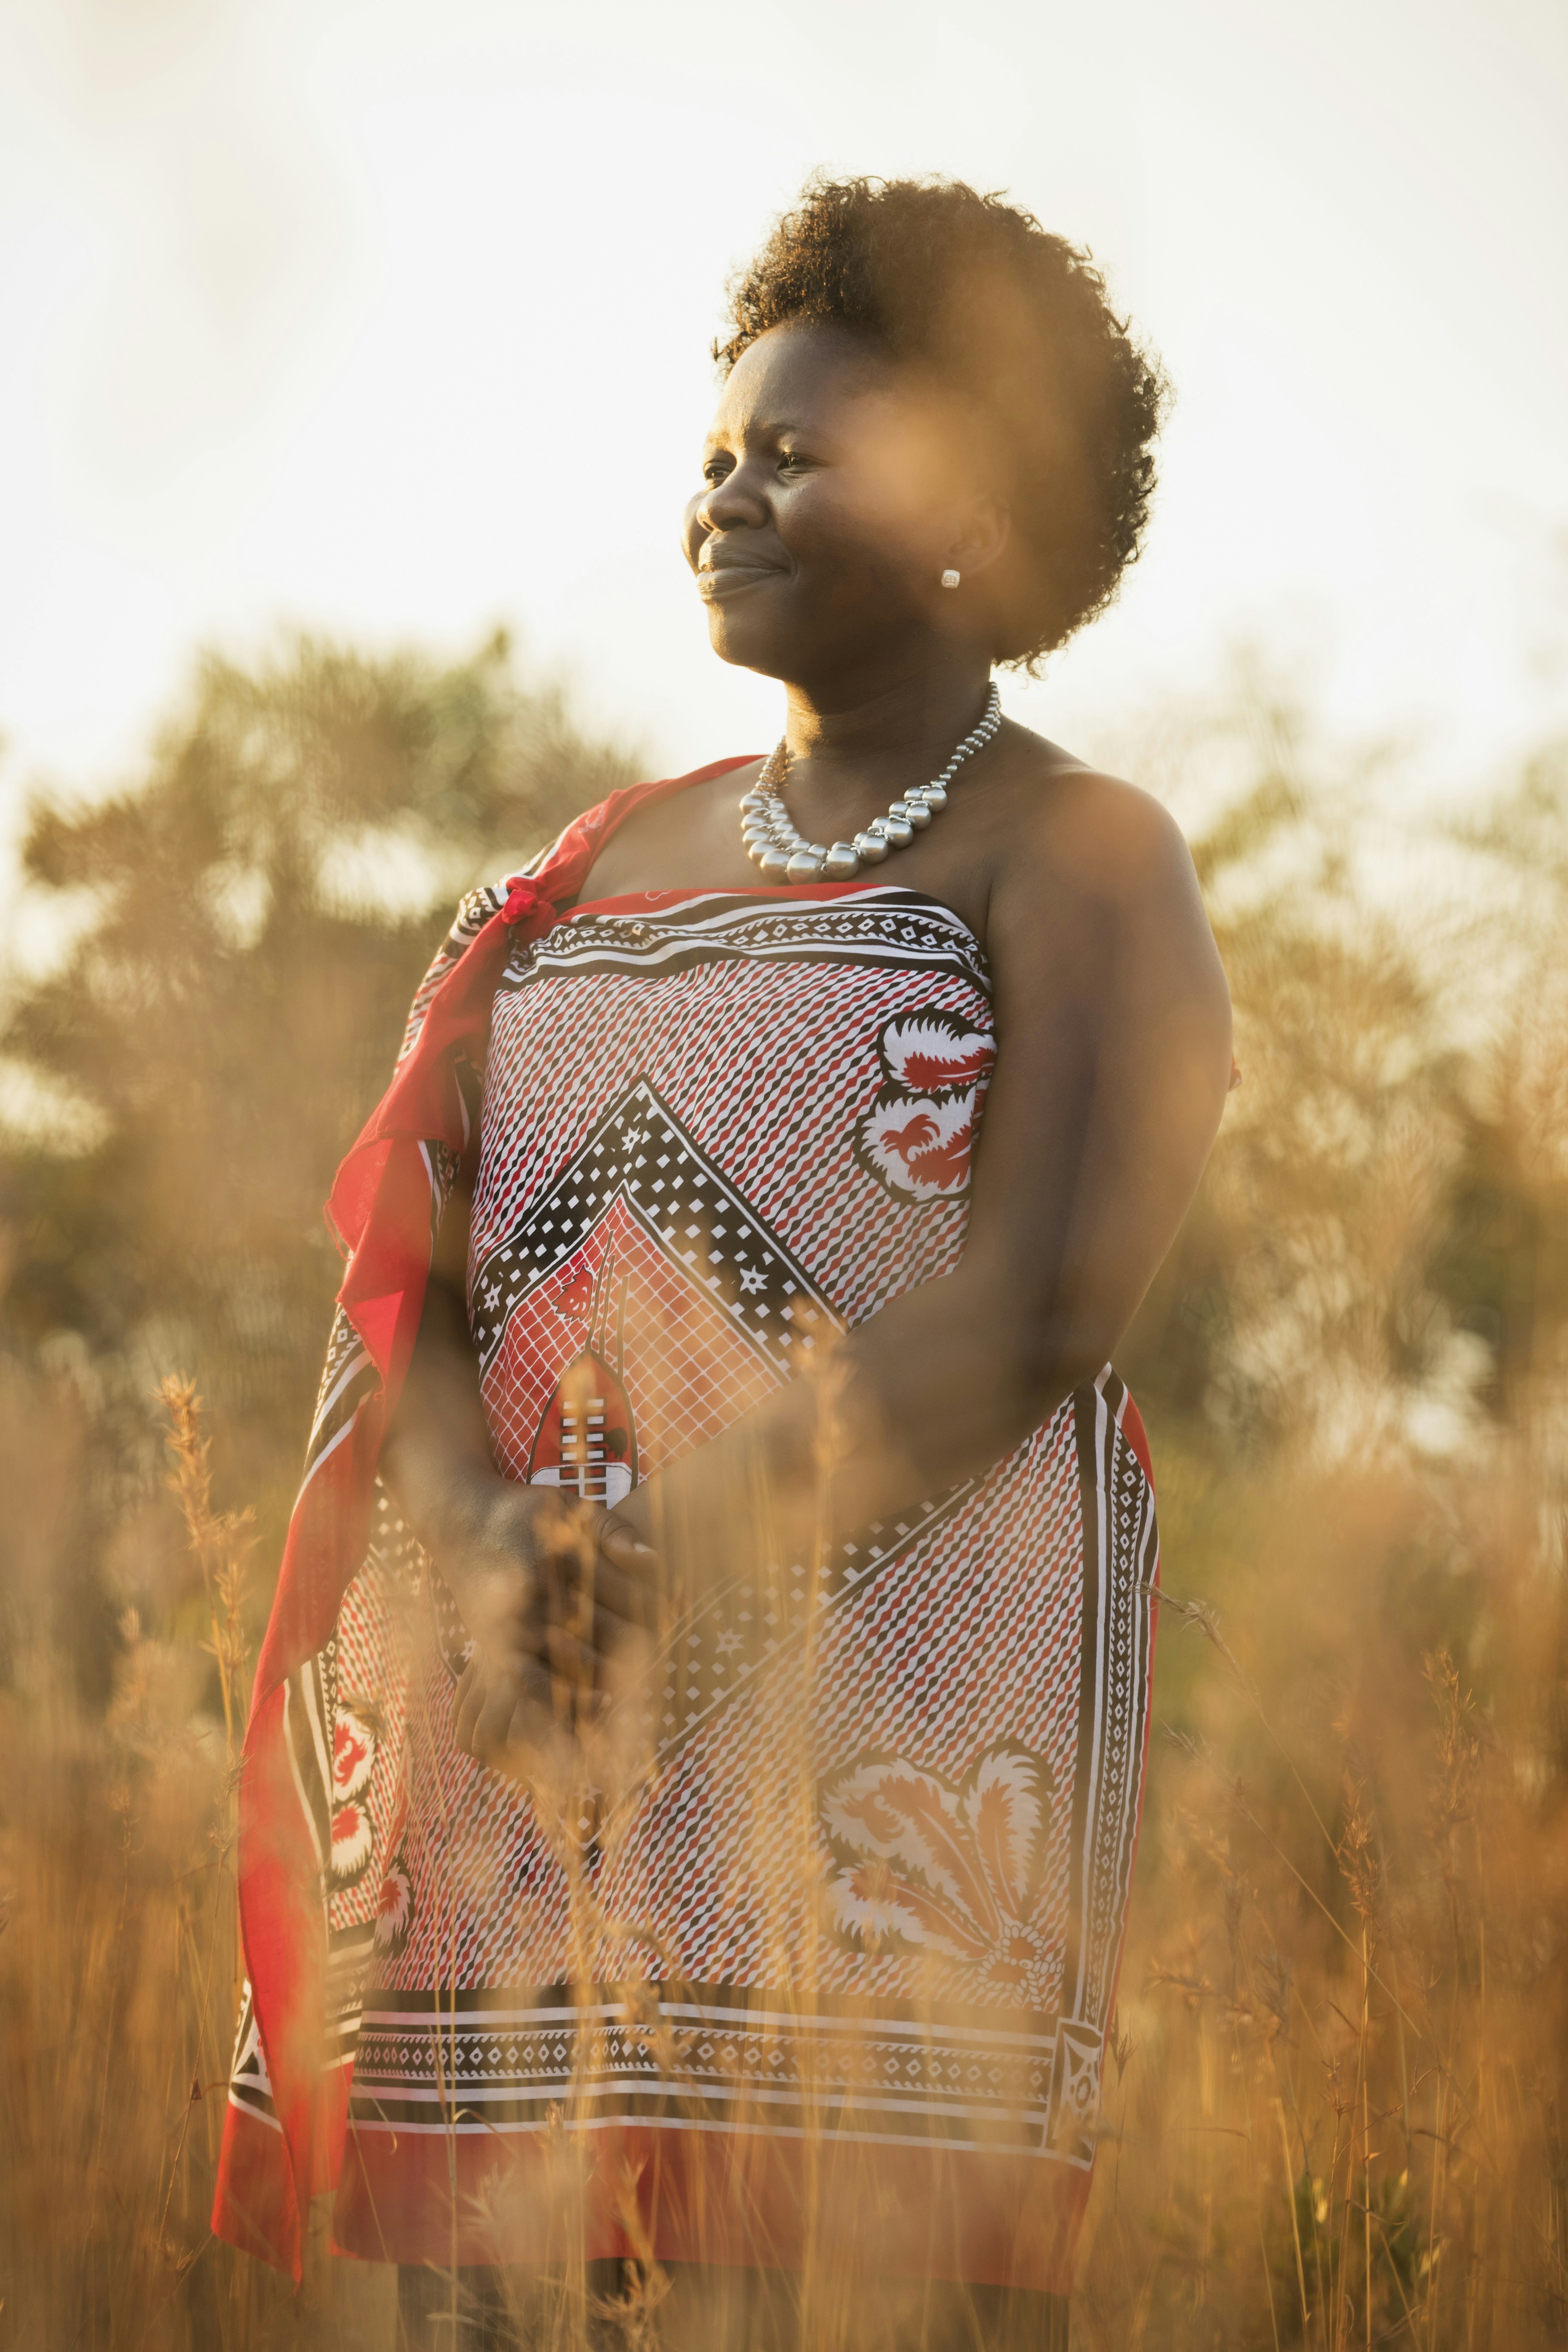 A woman, dressed in a traditional African patterned cloth of black and red, stands in long grass smiling